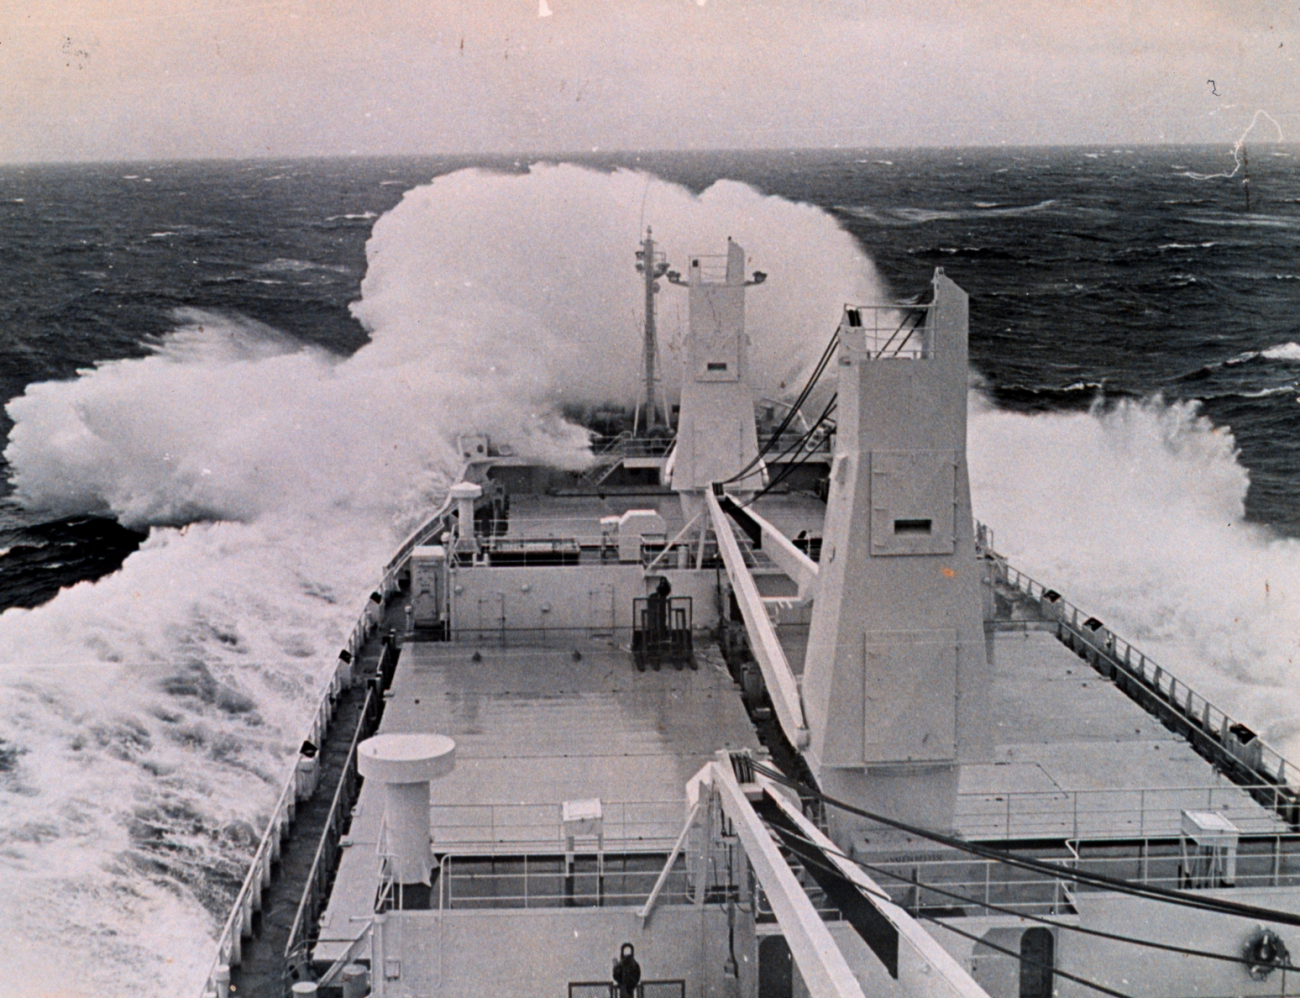 Merchantman WINTER WATER takes heavy seas on the bow from tropicalstorm Georgette